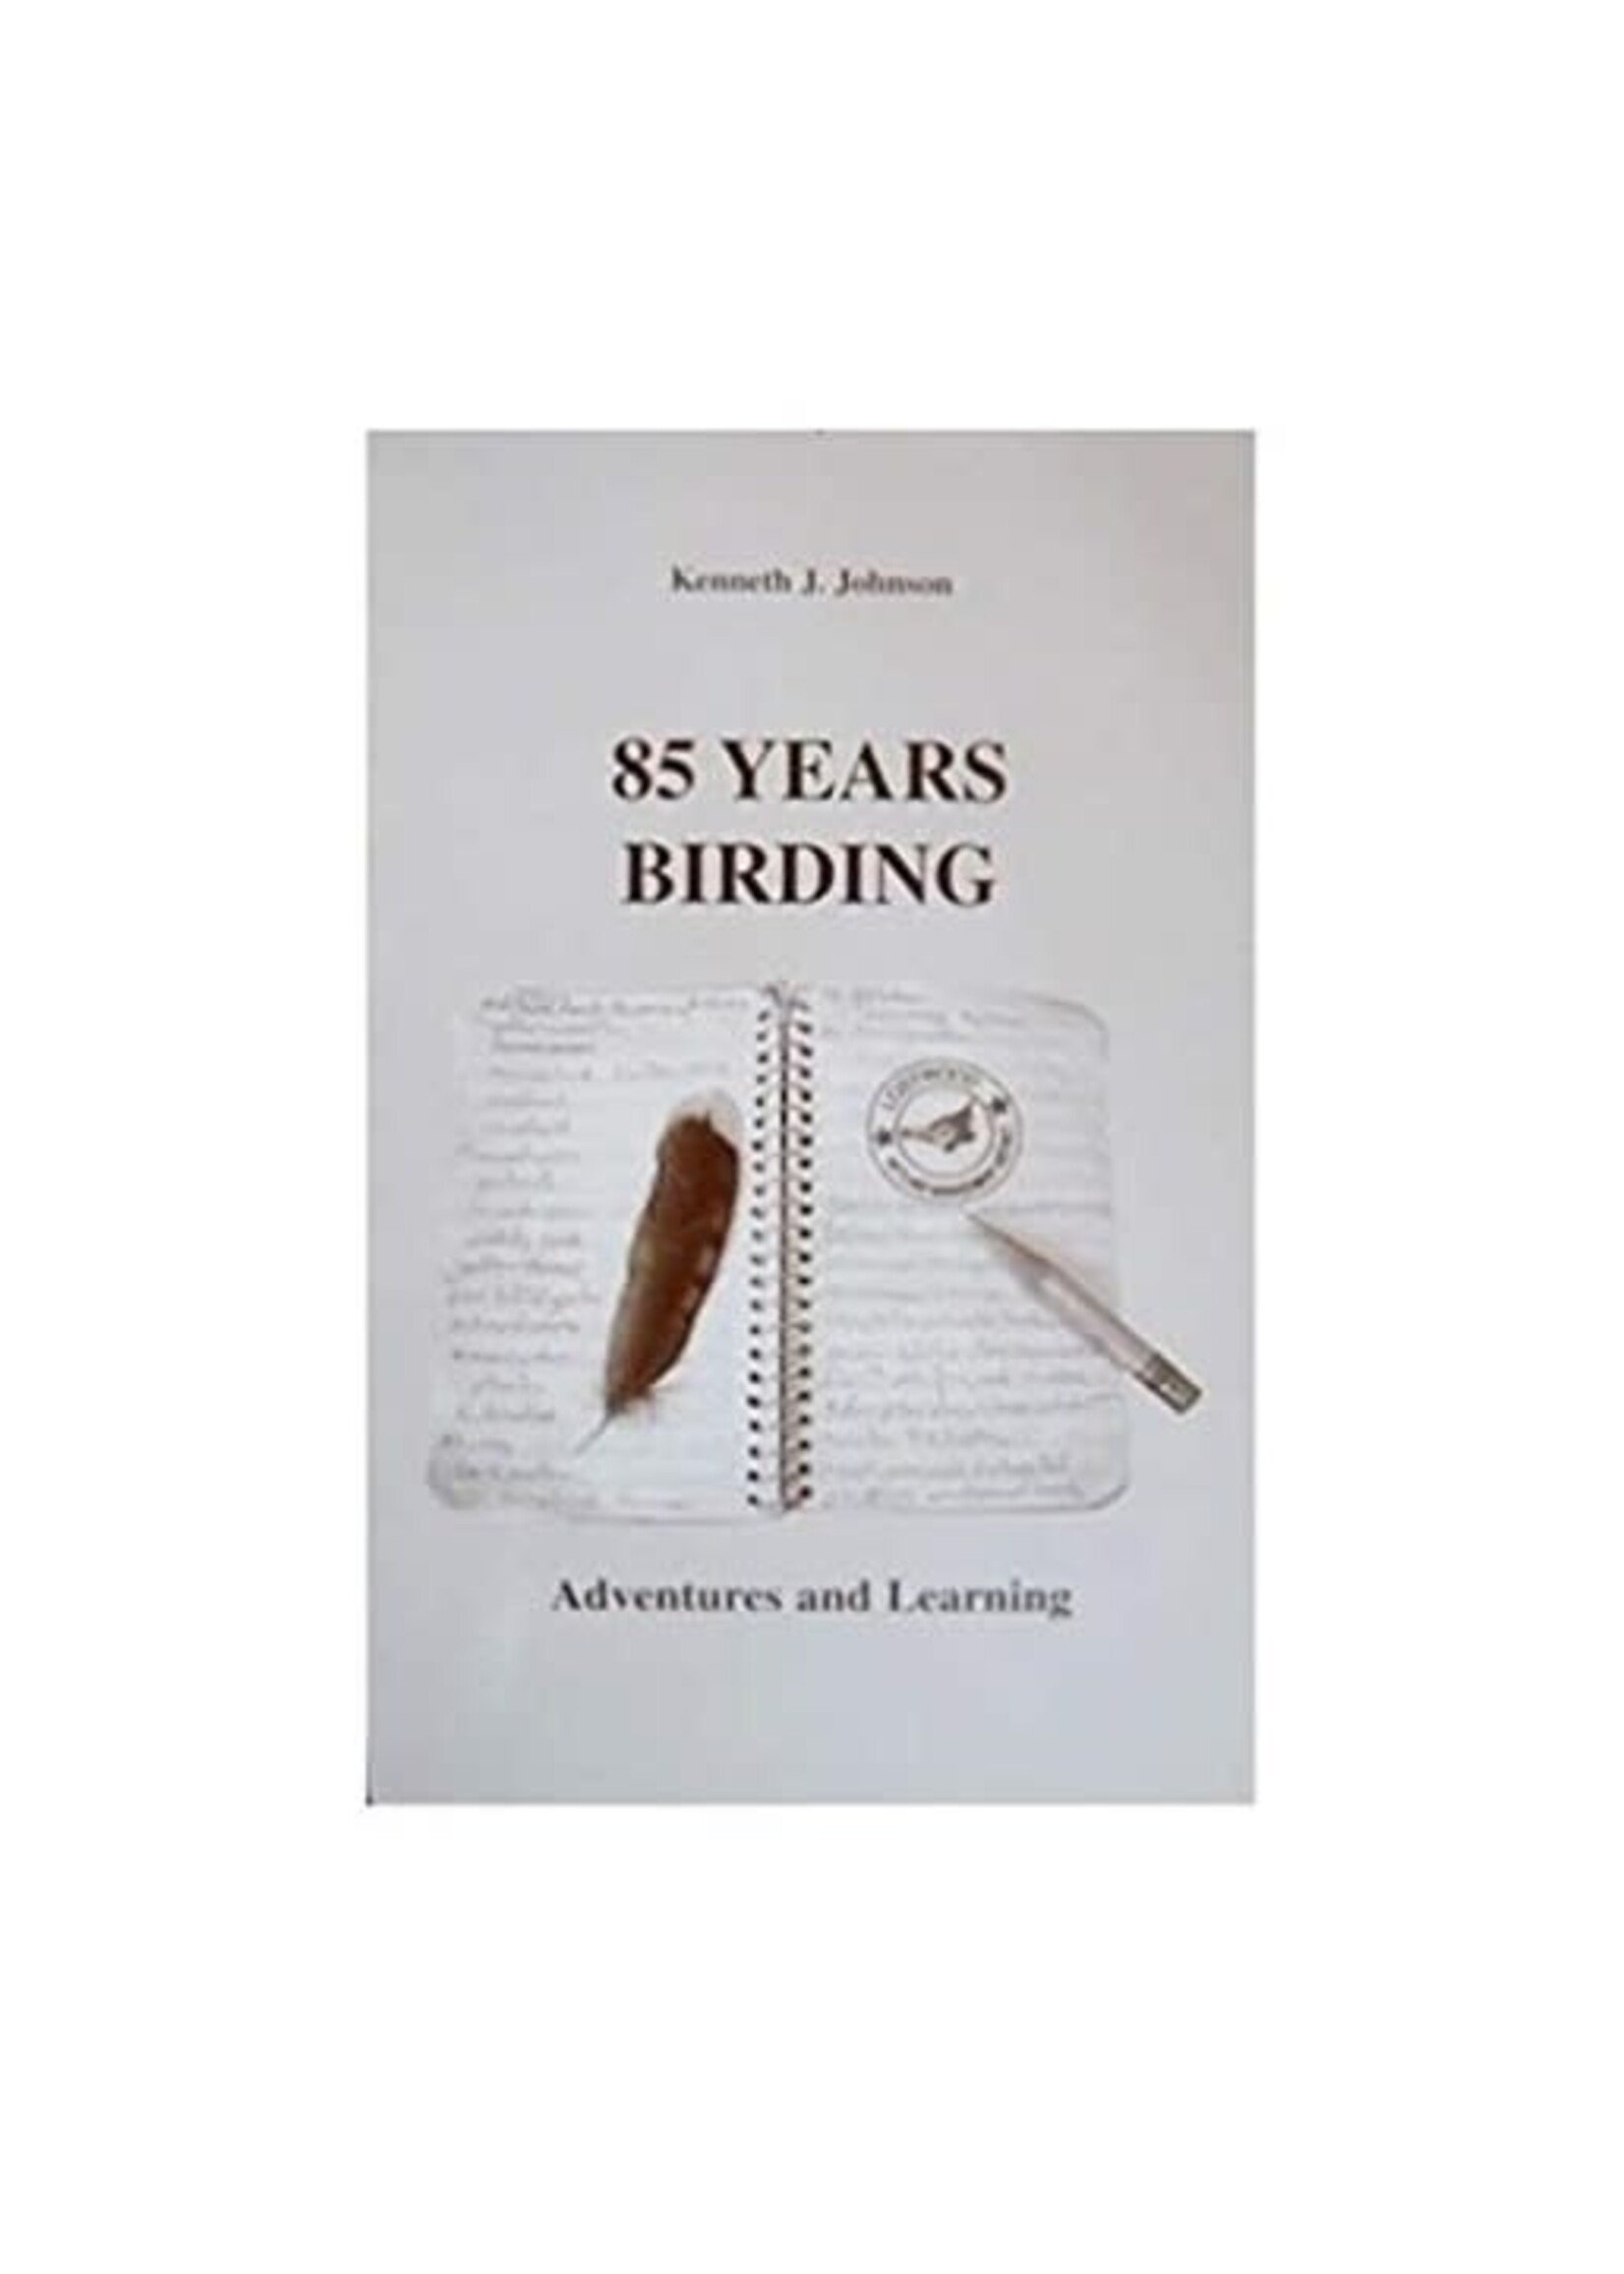 85 Years Birding: Adventures and Learning